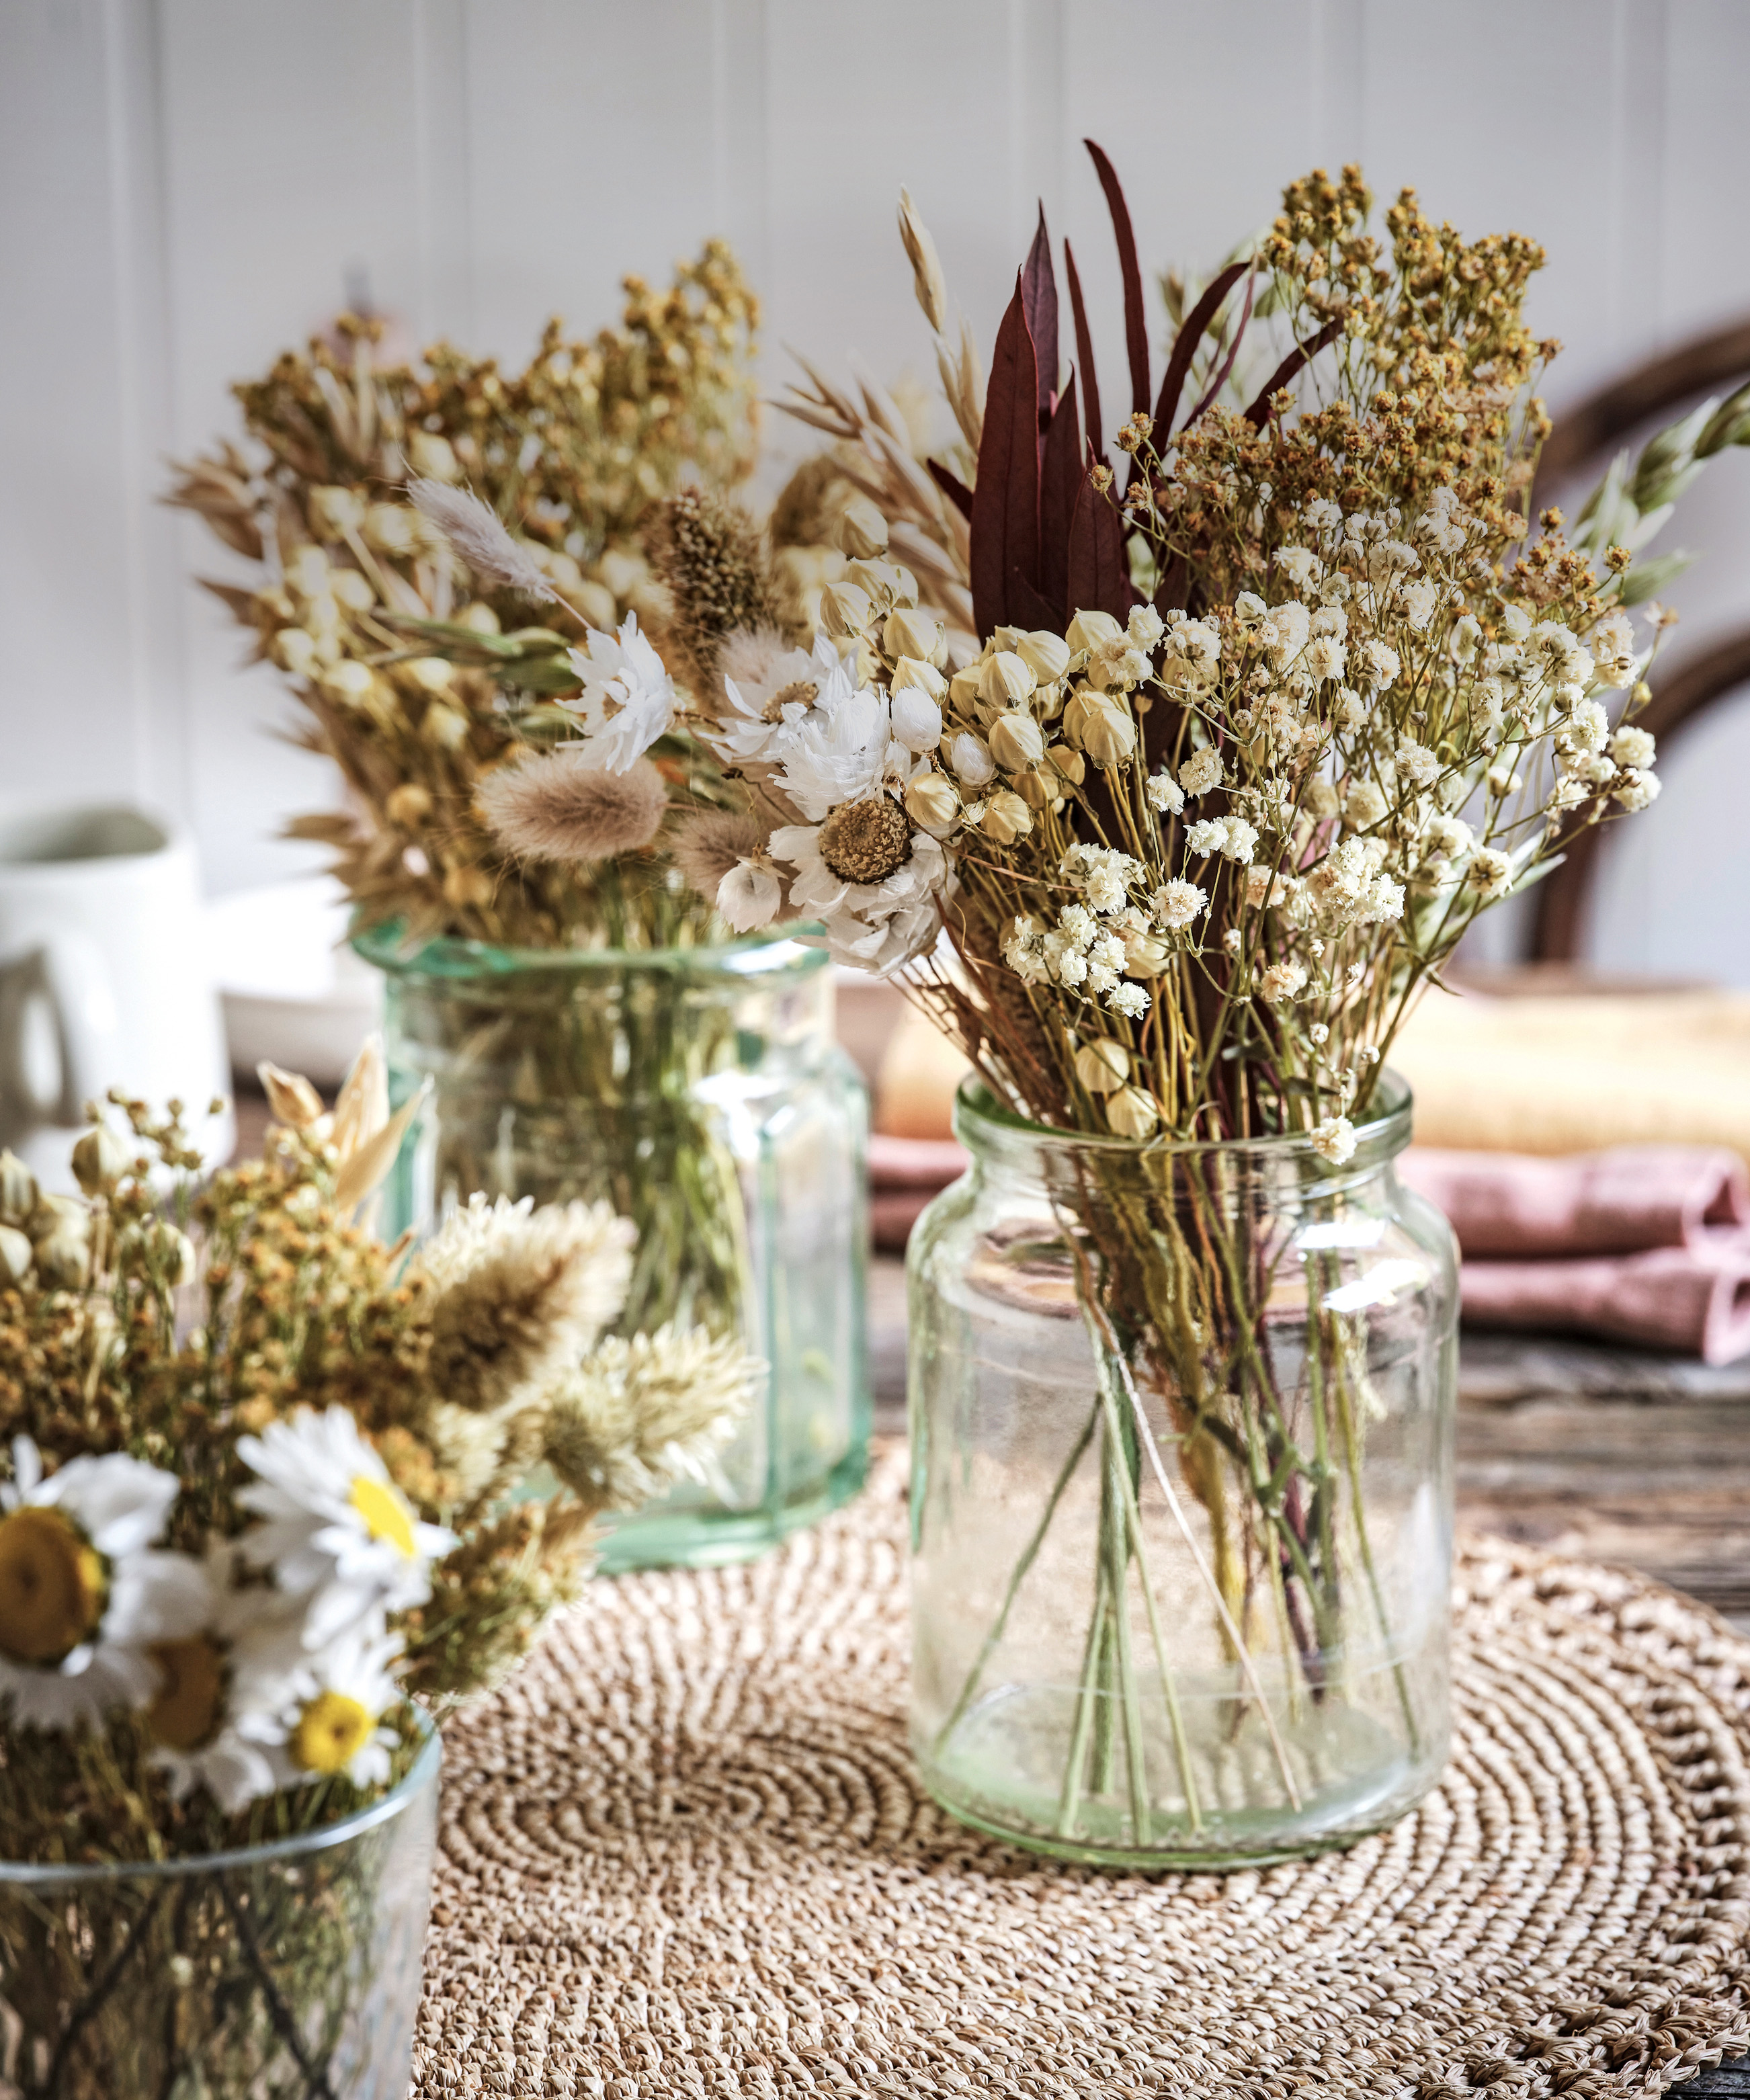 Rabbit tail grass combined with other dried flowers